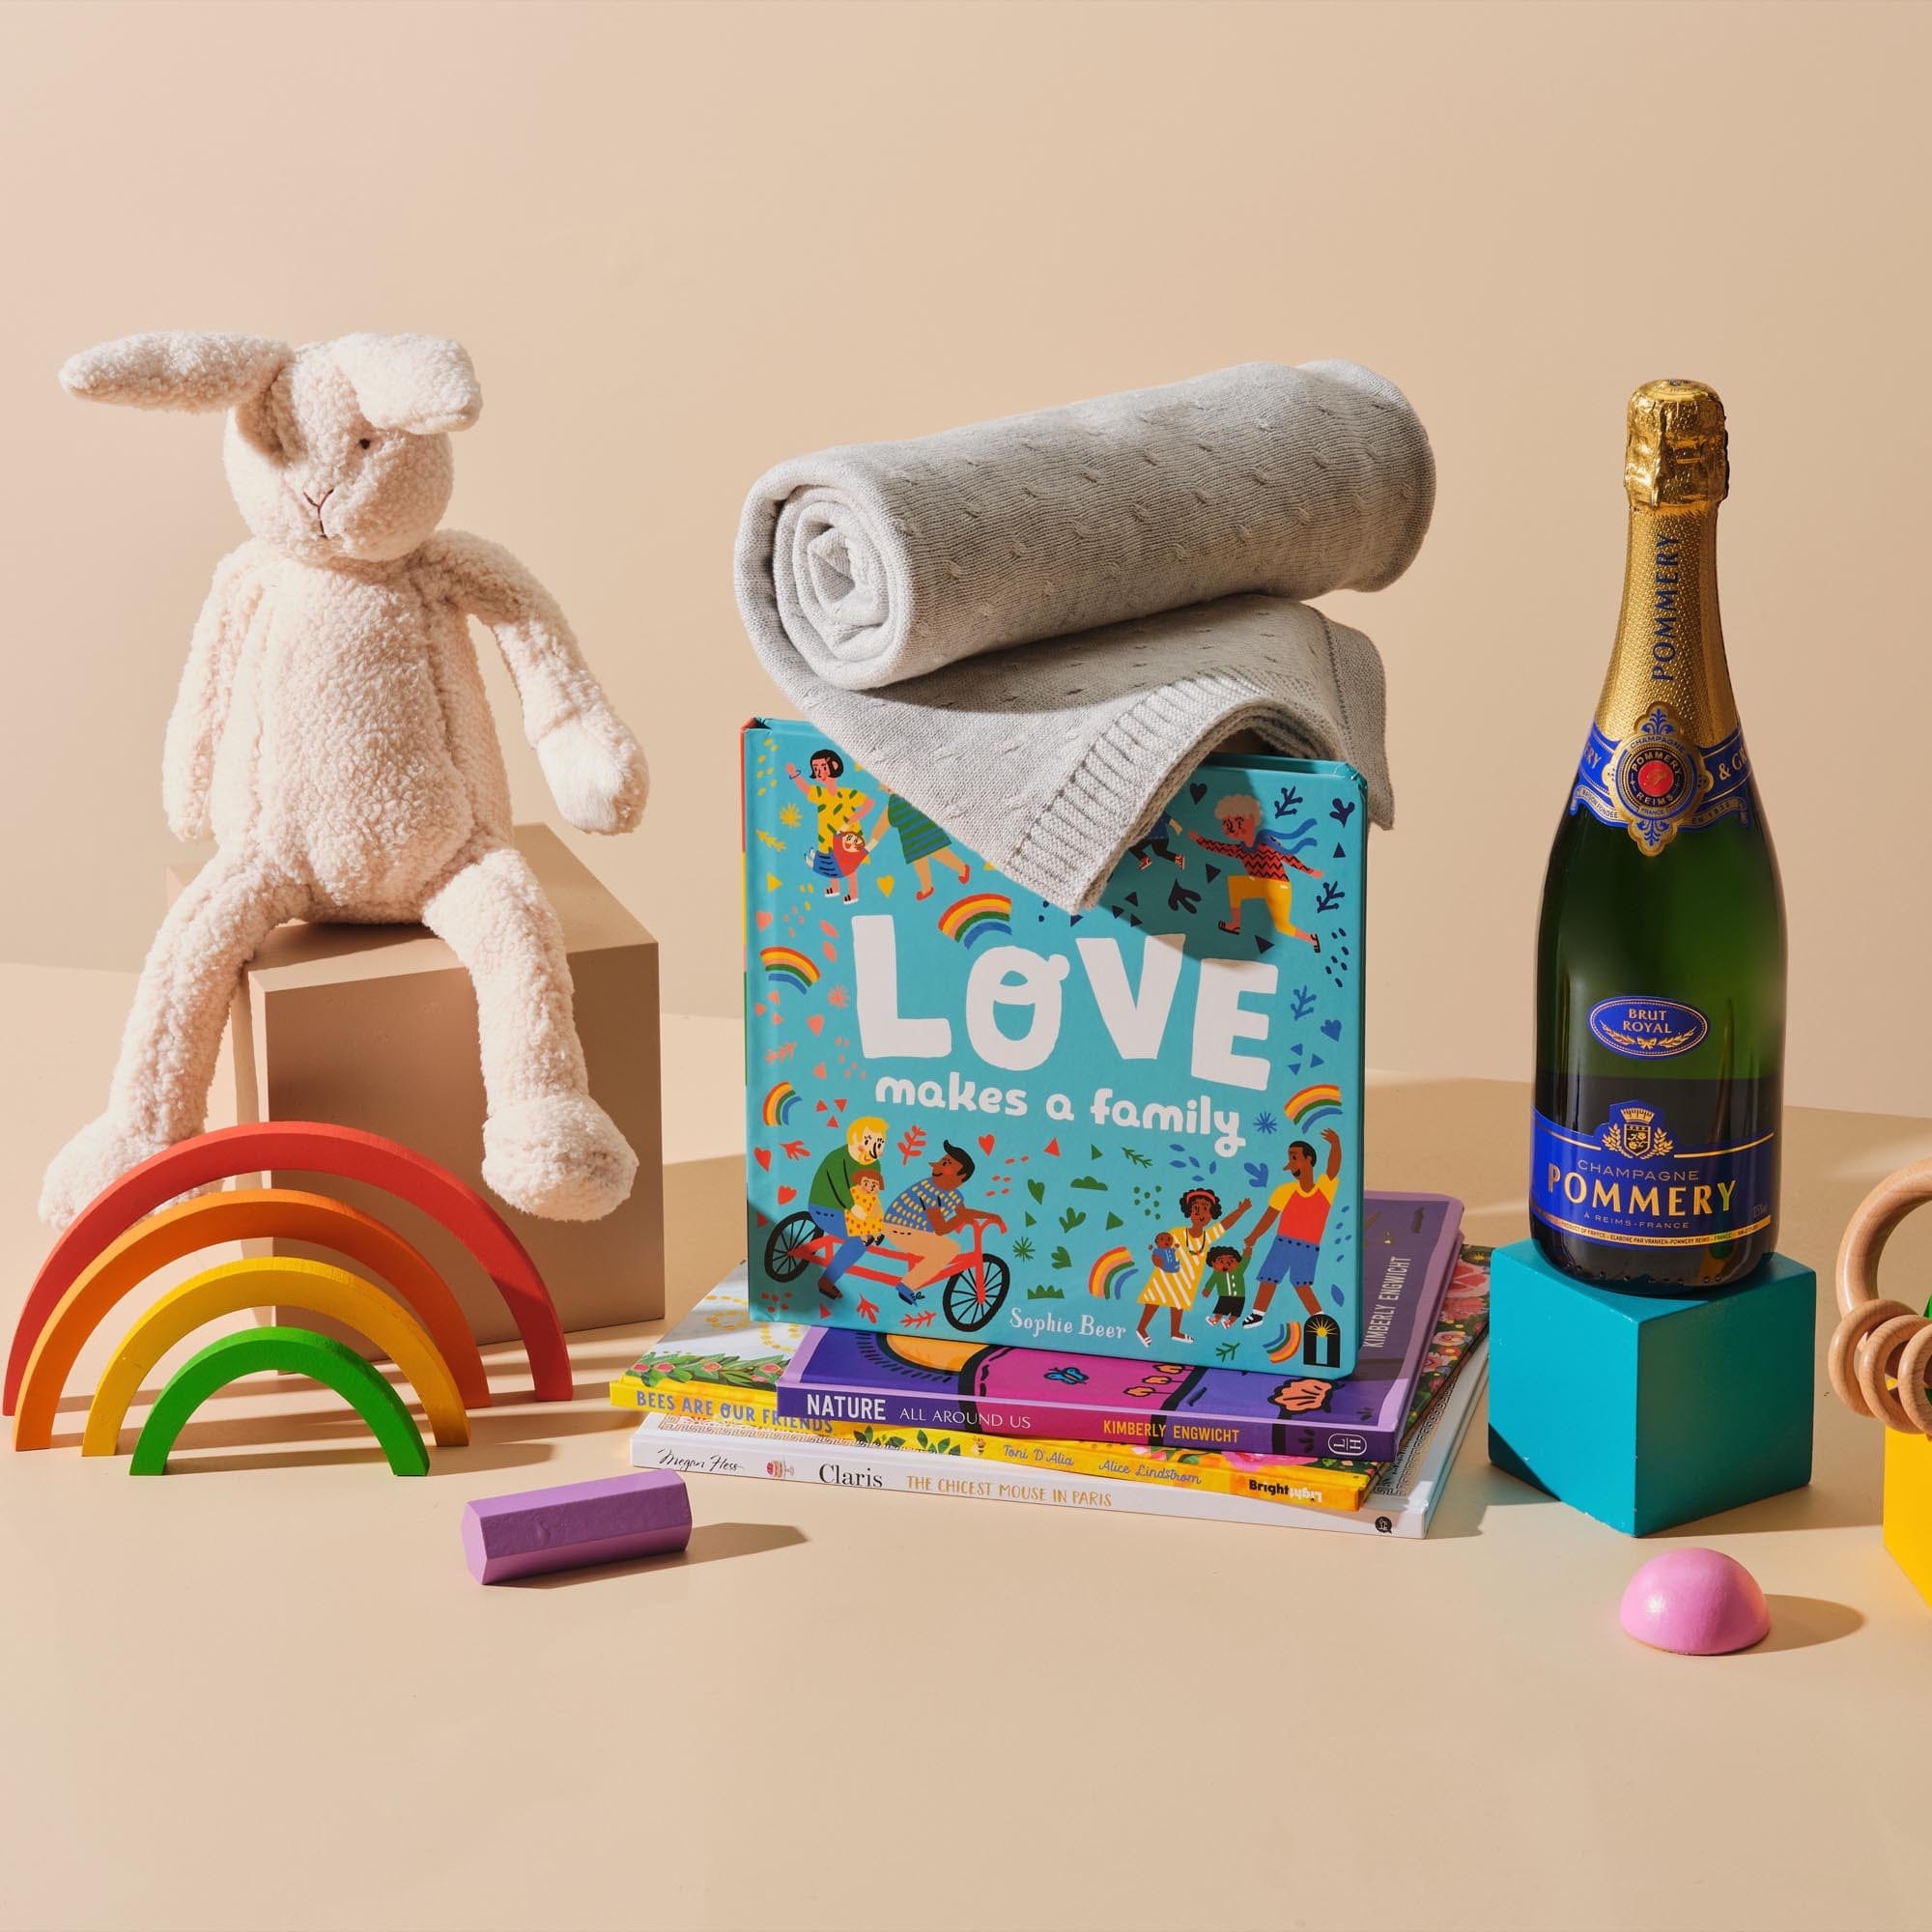 This image features Sophie Beer's Love Makes a Family placed on top of Nature All Around Us by Kimberly Engwicht, Bees Are Our Friends written by Toni D’Alia and Claris, The Chicest Mouse in Paris by Megan Hess. Also included in the image is Purebaby’s Natural Teething Ring, Essentials Blanket and Bonnie the Bunny Toy. As for something for Mum, the Champagne Pommery Brut Royal, is also featured in this image. 